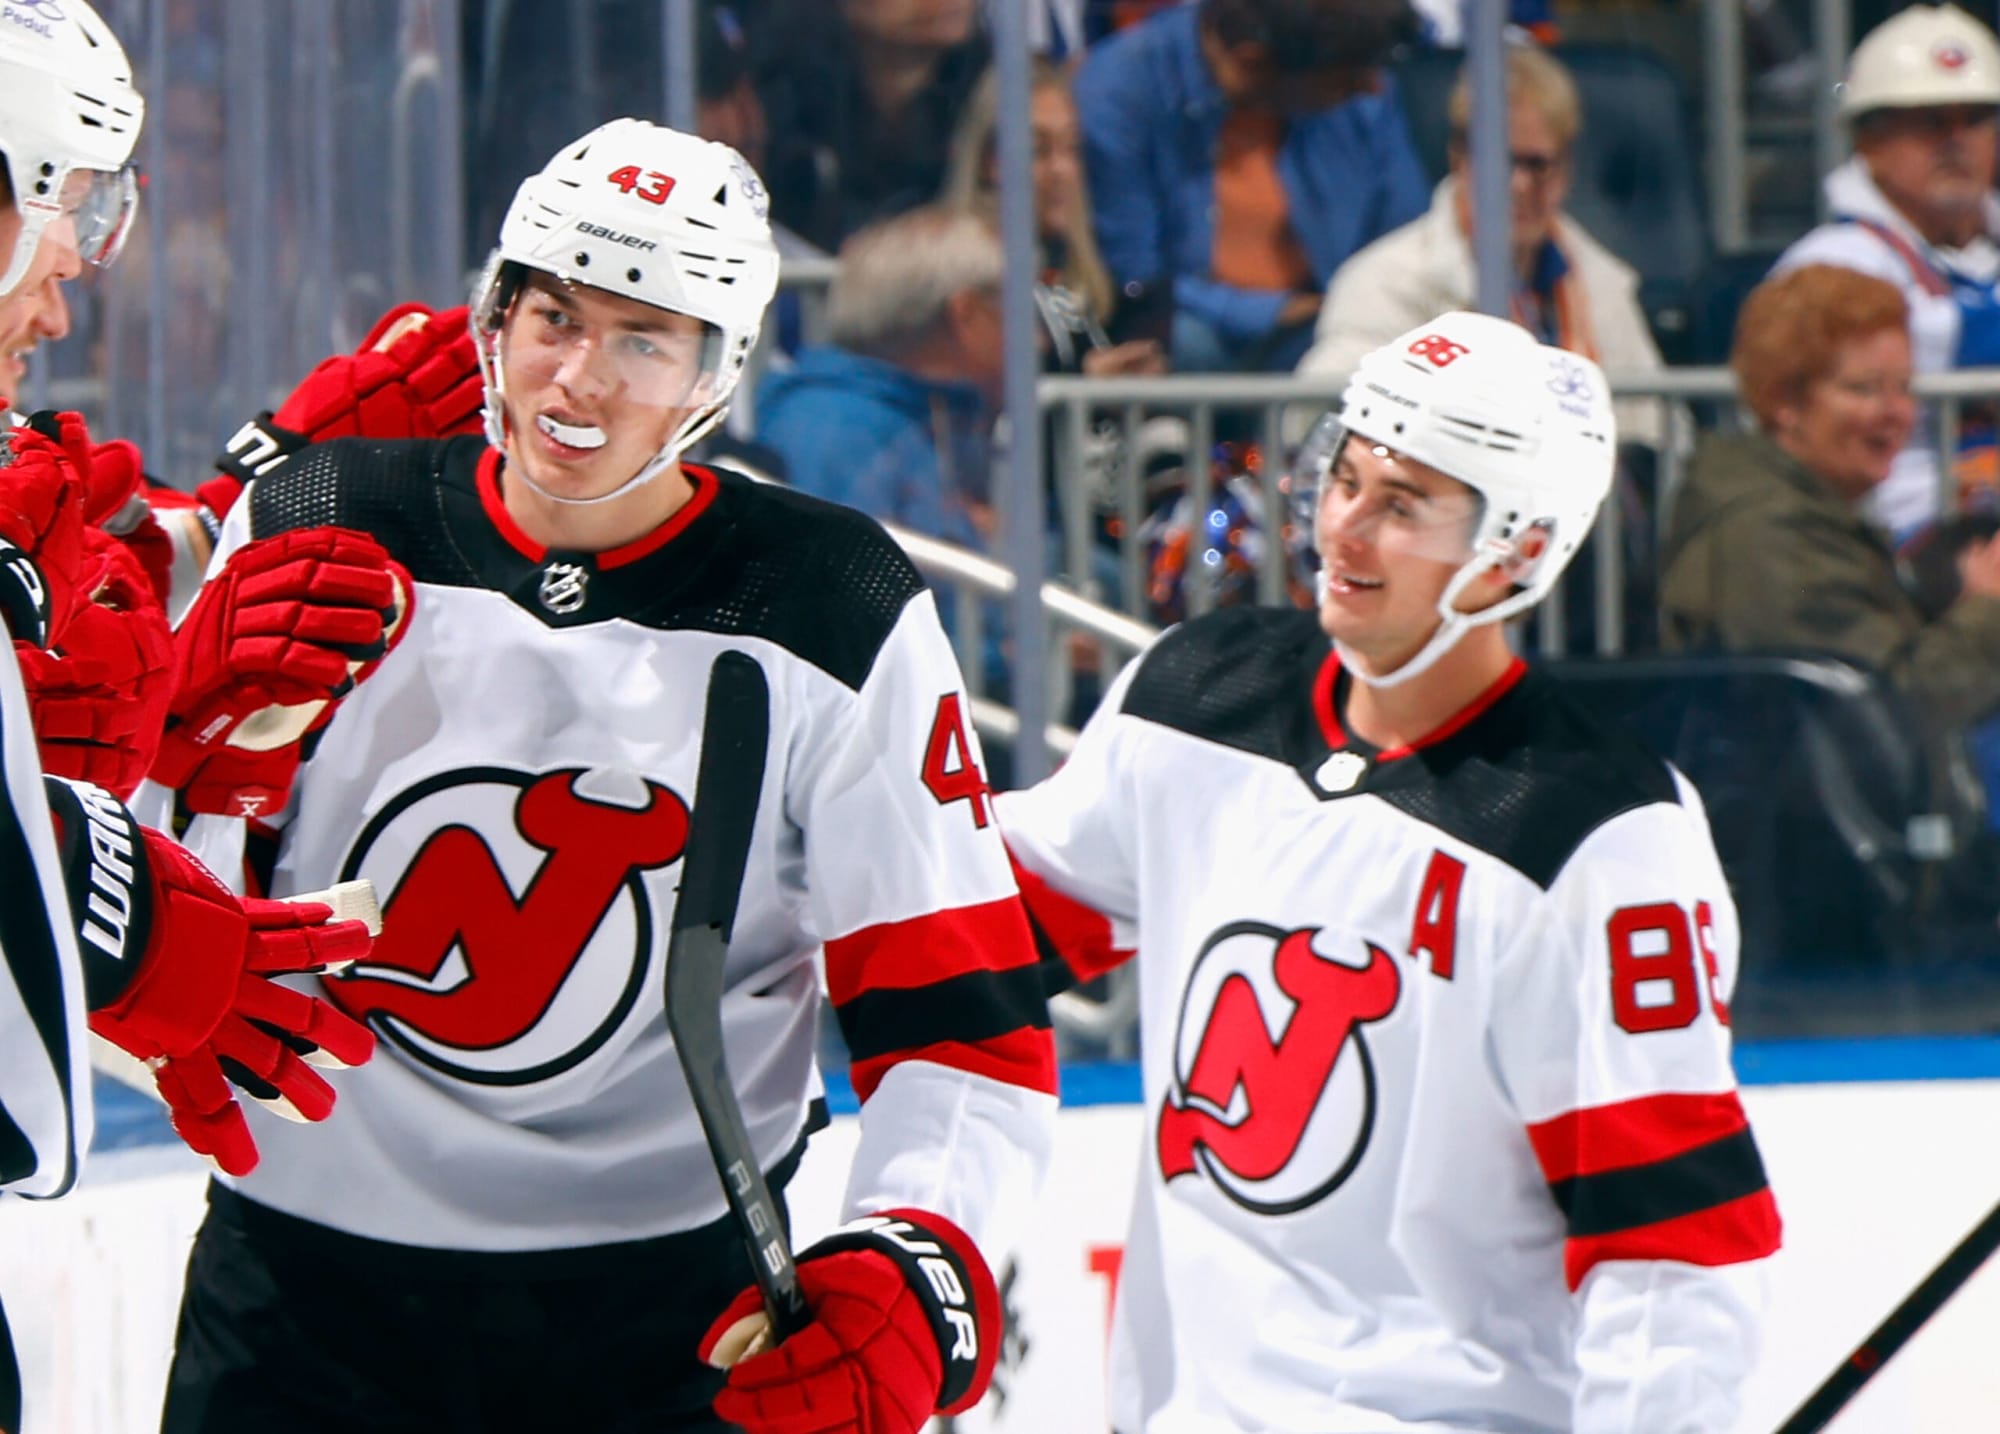 Devils' Luke Hughes scores first career goal with assist from his